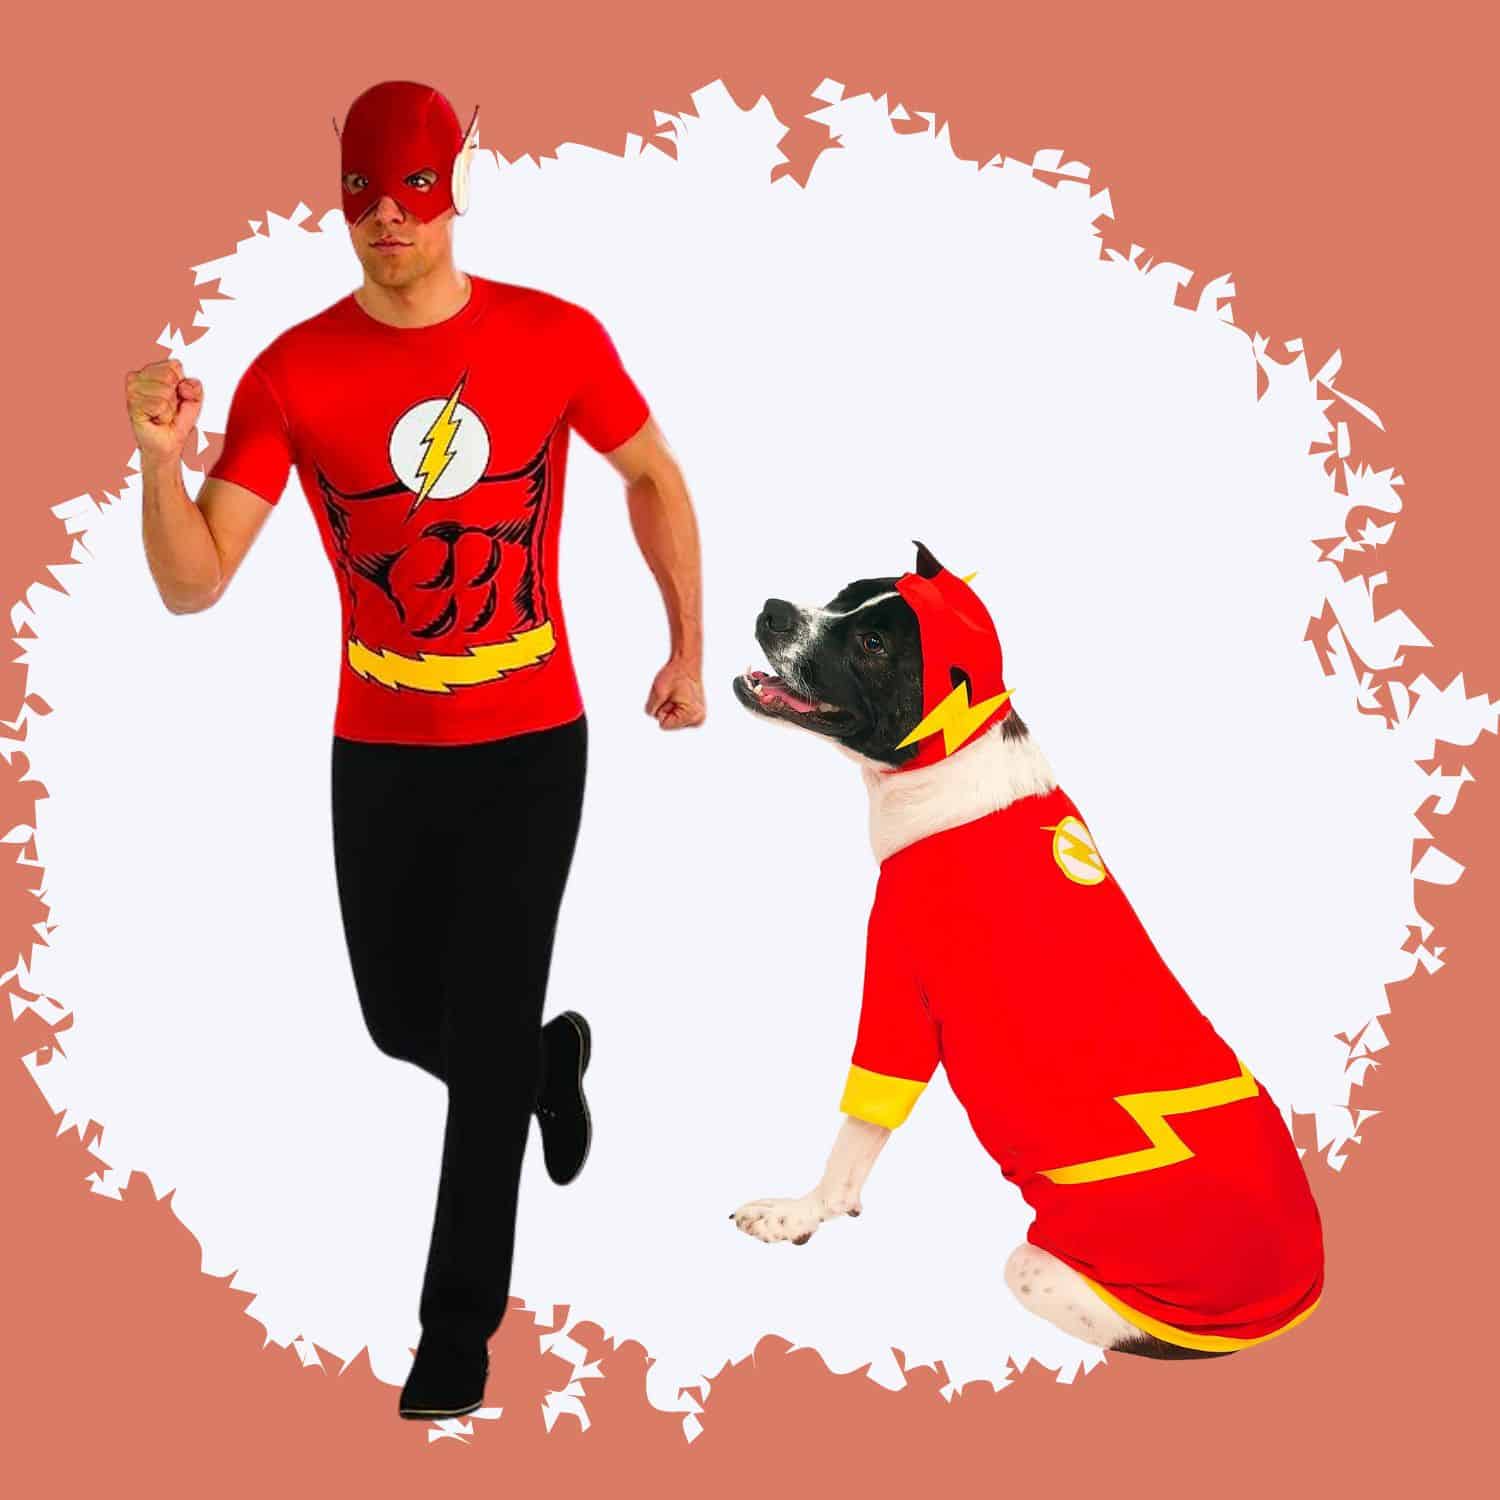 Dog And Owner Halloween Costumes The Flash - Dog And Owner Halloween Costumes | Pawcool ™